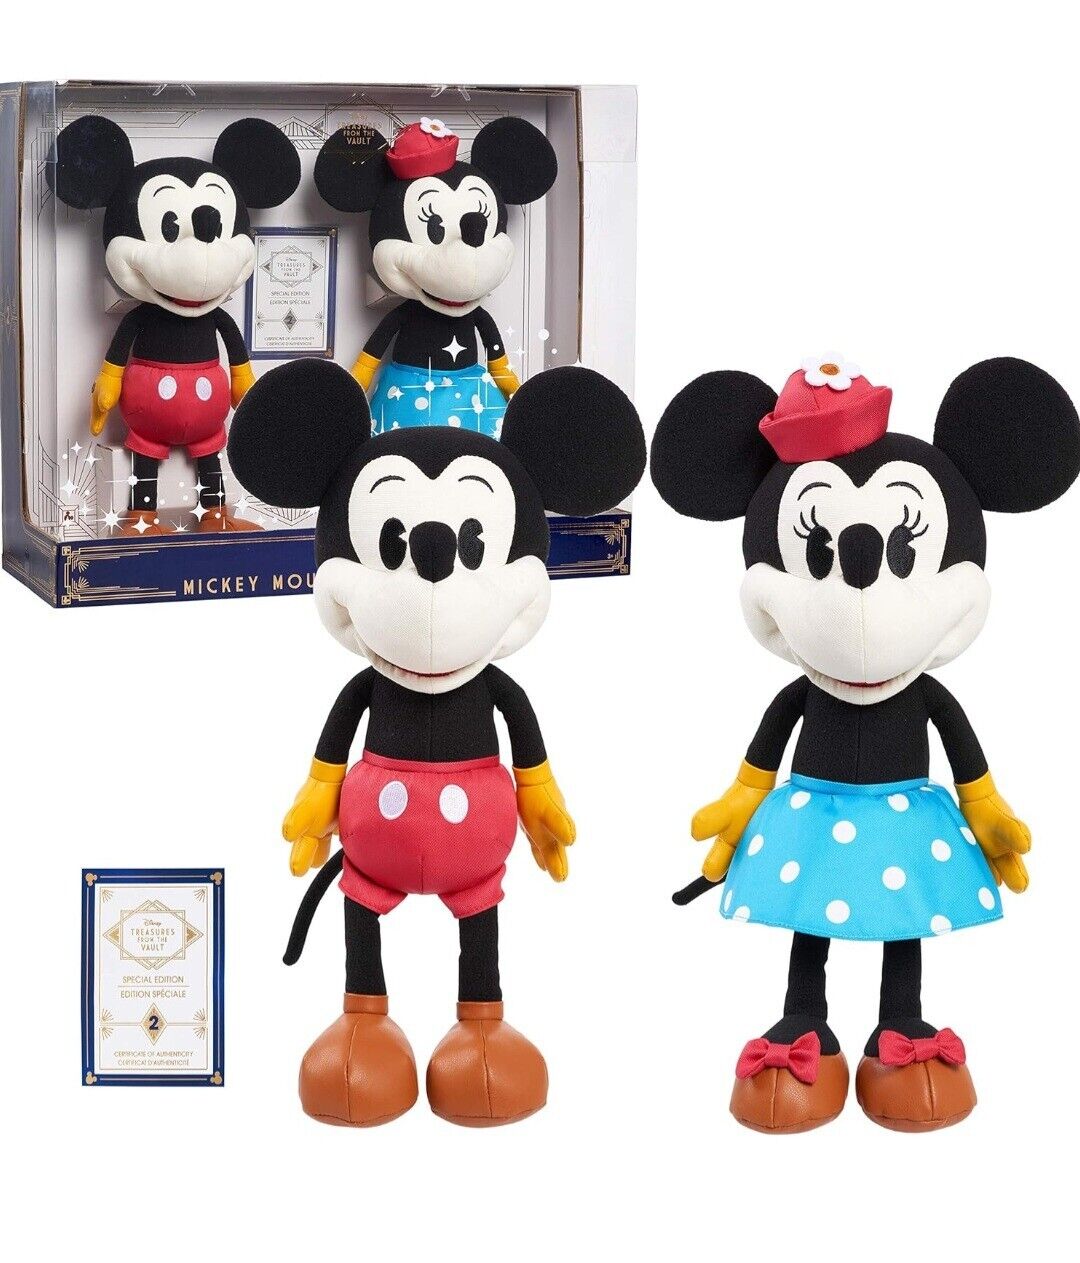 Disney Treasures From the Vault 1930s Minnie and Mickey Limited Edition in Box